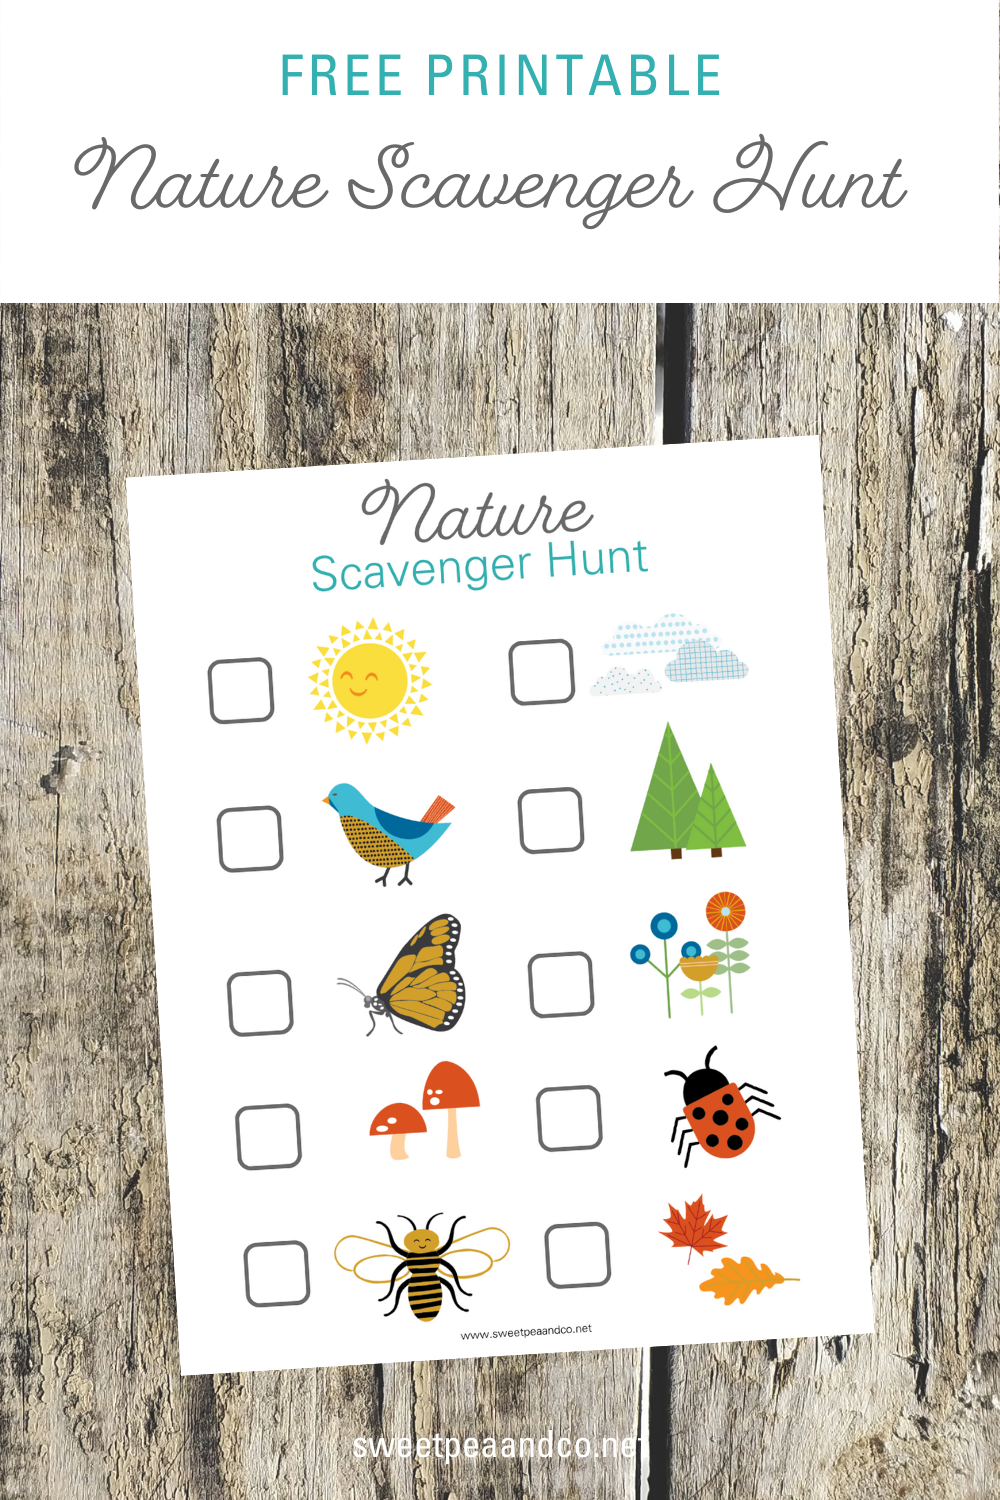 Get outdoors with a nature scavenger hunt